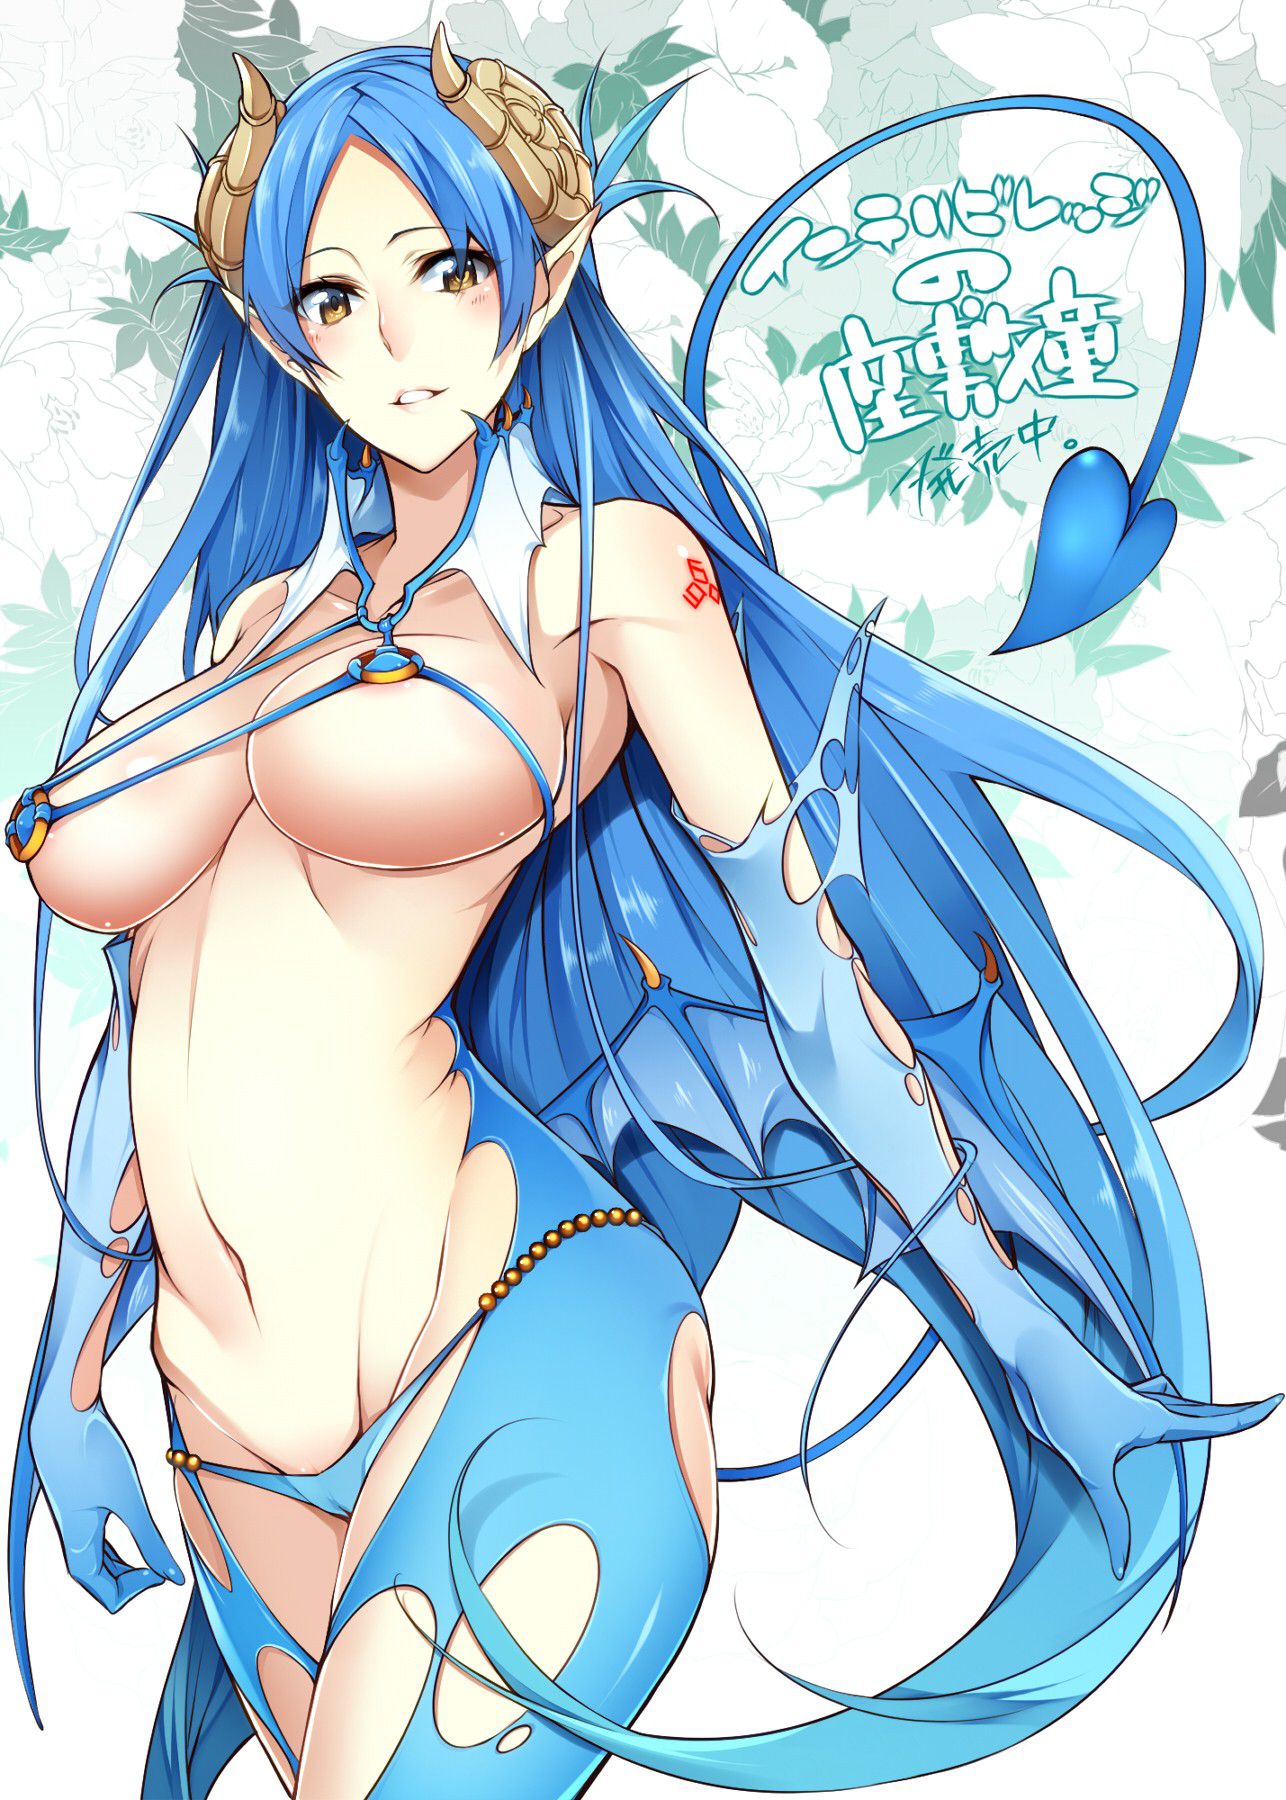 [2nd] Secondary erotic image of a girl with blue or light blue hair Part 18 [ blue hair ] 14